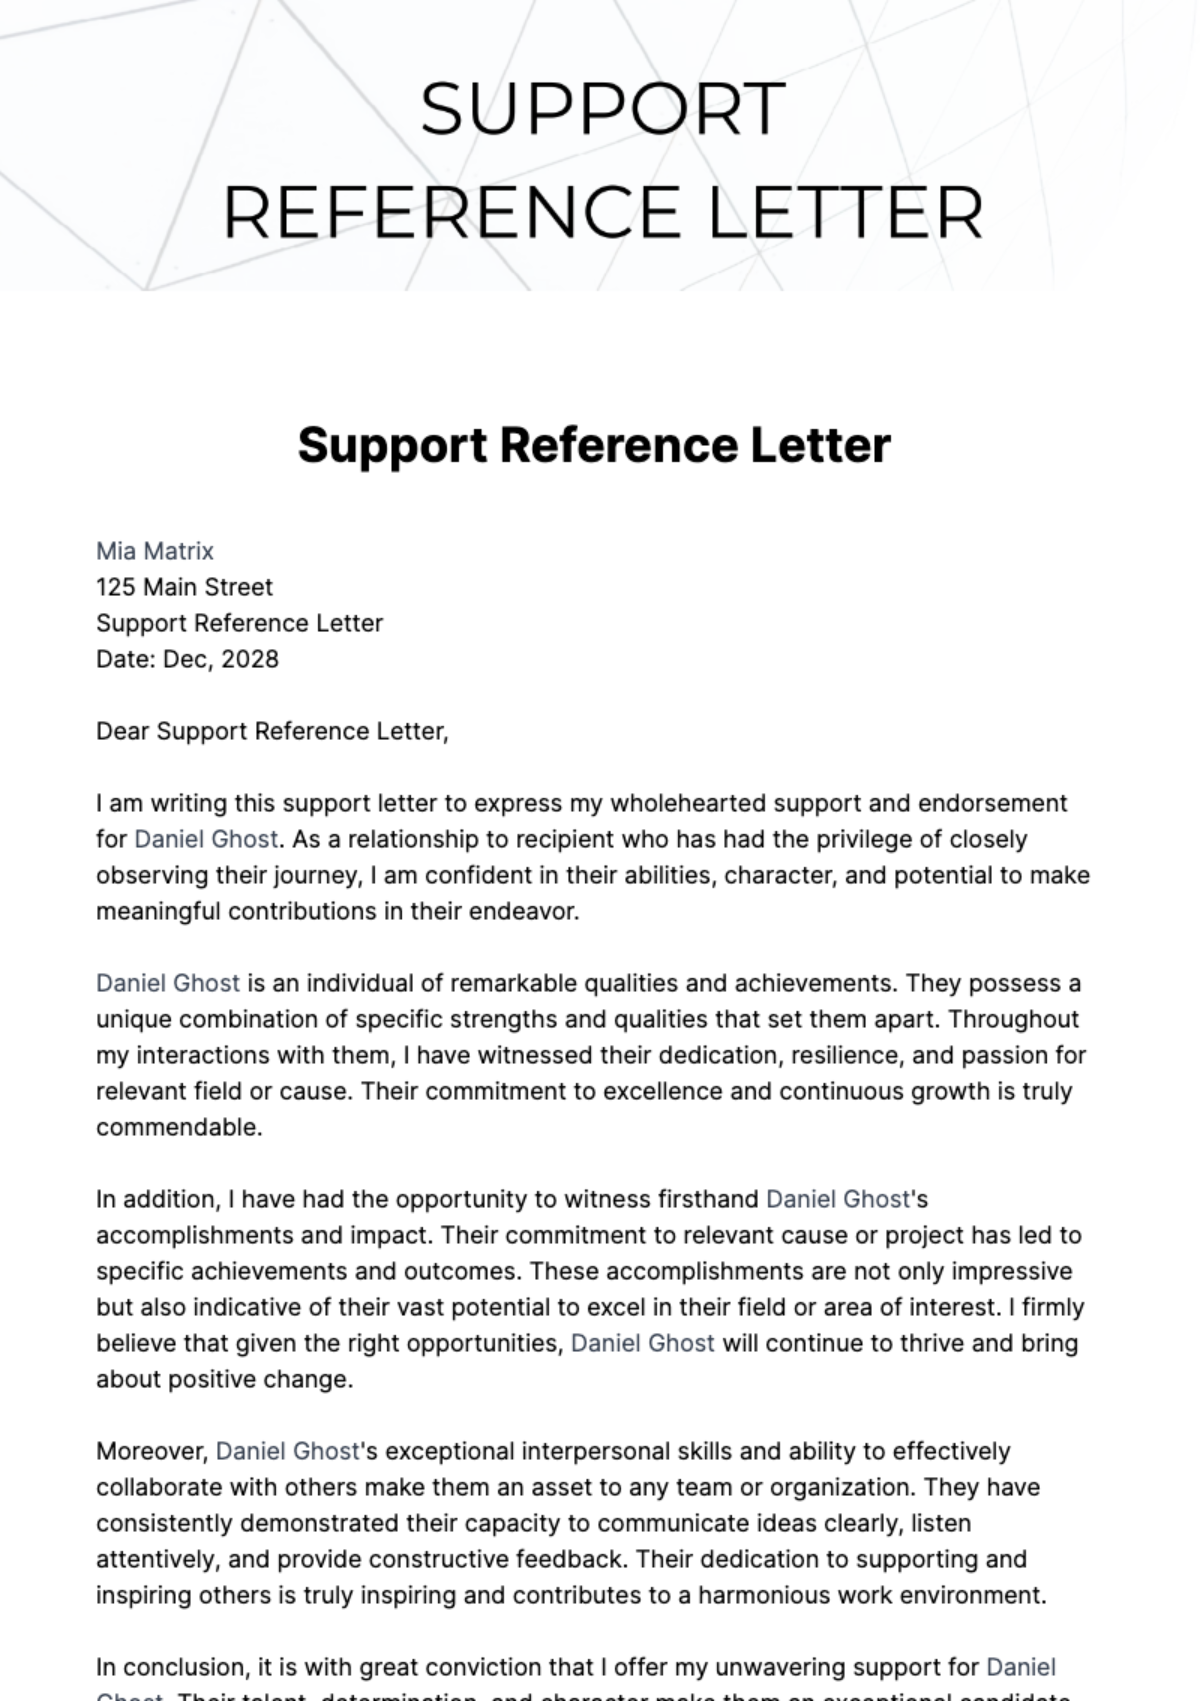 Free Support Reference Letter Template